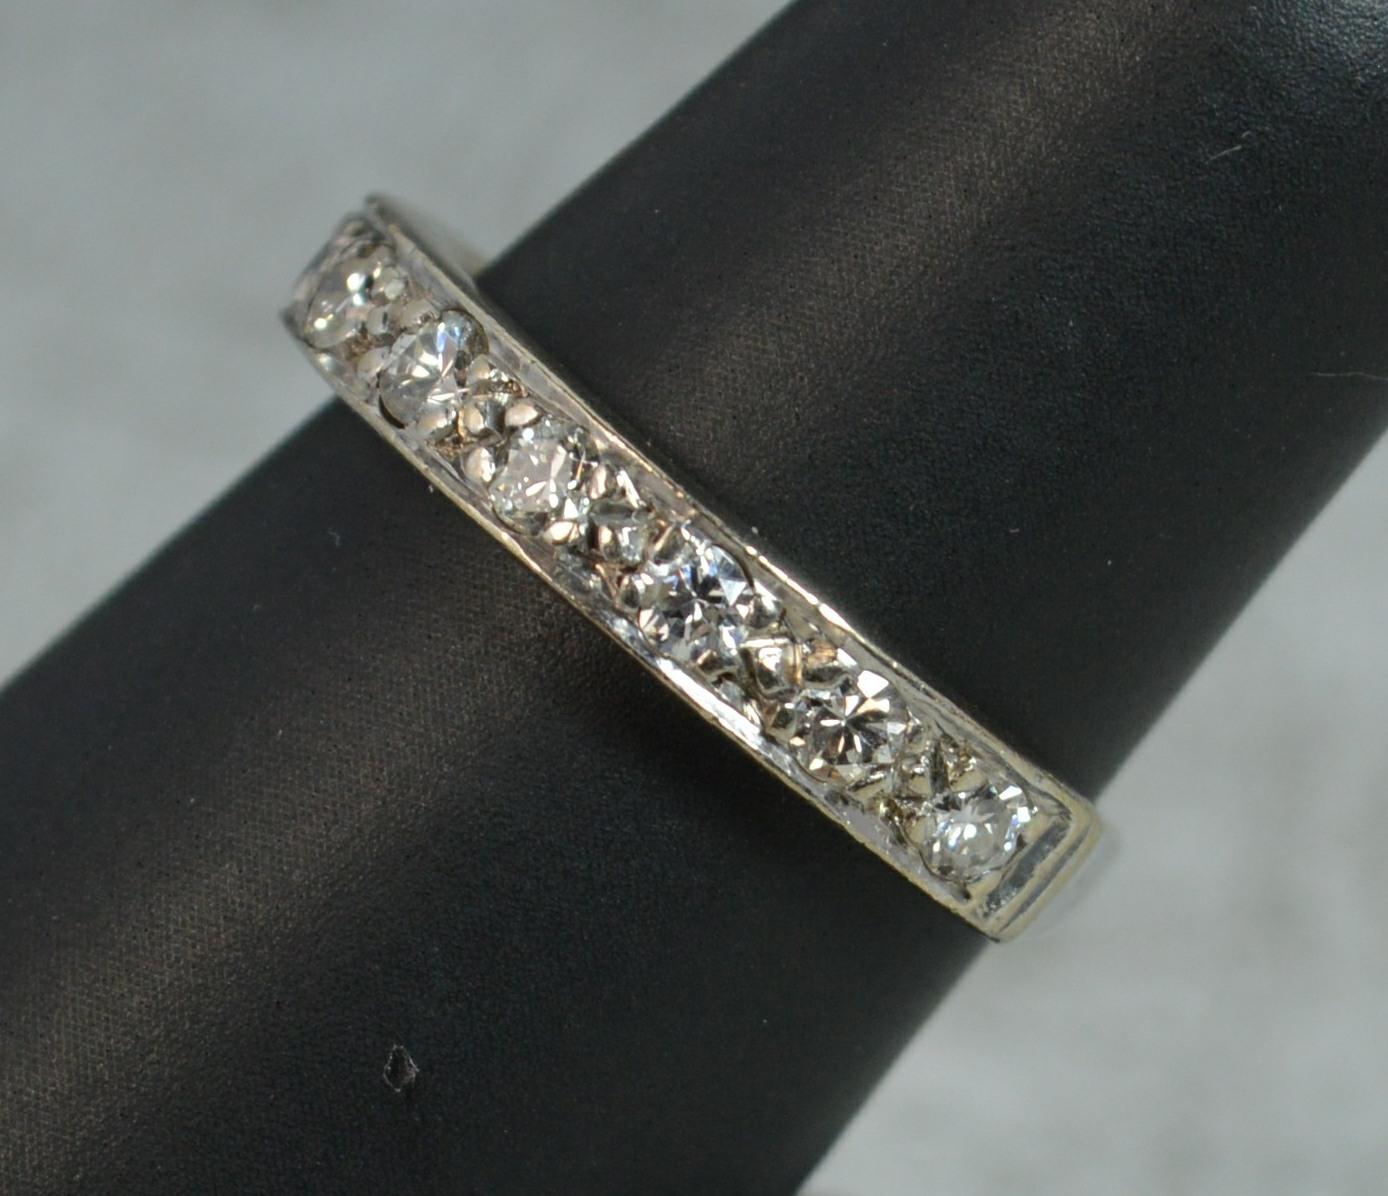 An 18 carat gold and diamond ring.
18 carat white gold example.
Designed with nine natural round brilliant cut diamonds to total approx 0.32 carat.
21mm spread of stones, 3.4mm wide band to the front.

CONDITION ; Very good. Well set diamonds, issue